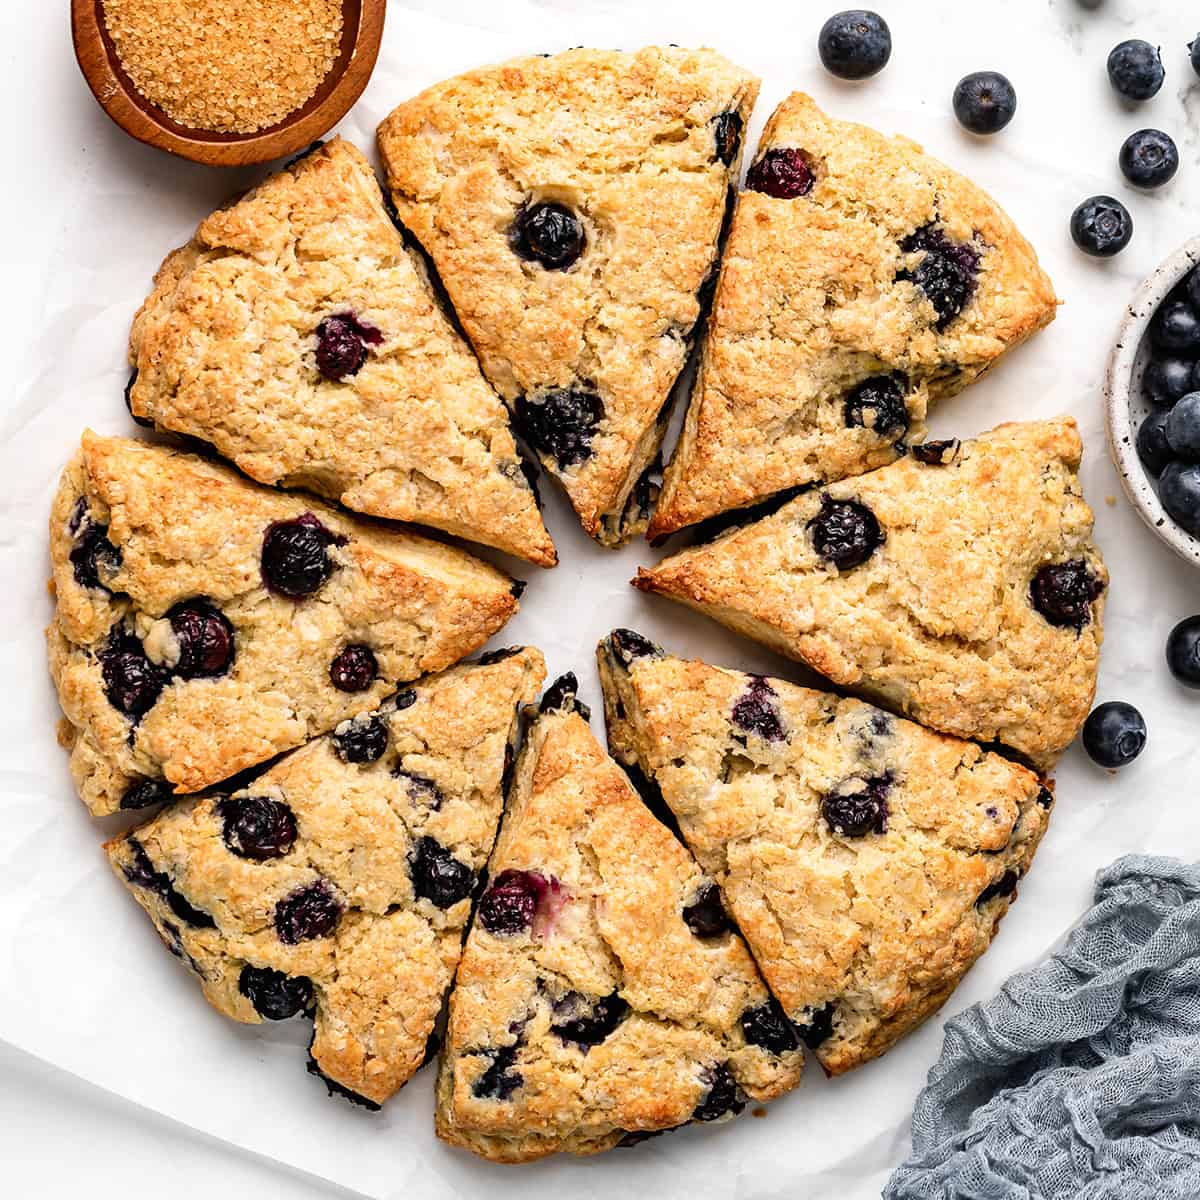 8 blueberry scones arranged in a circle